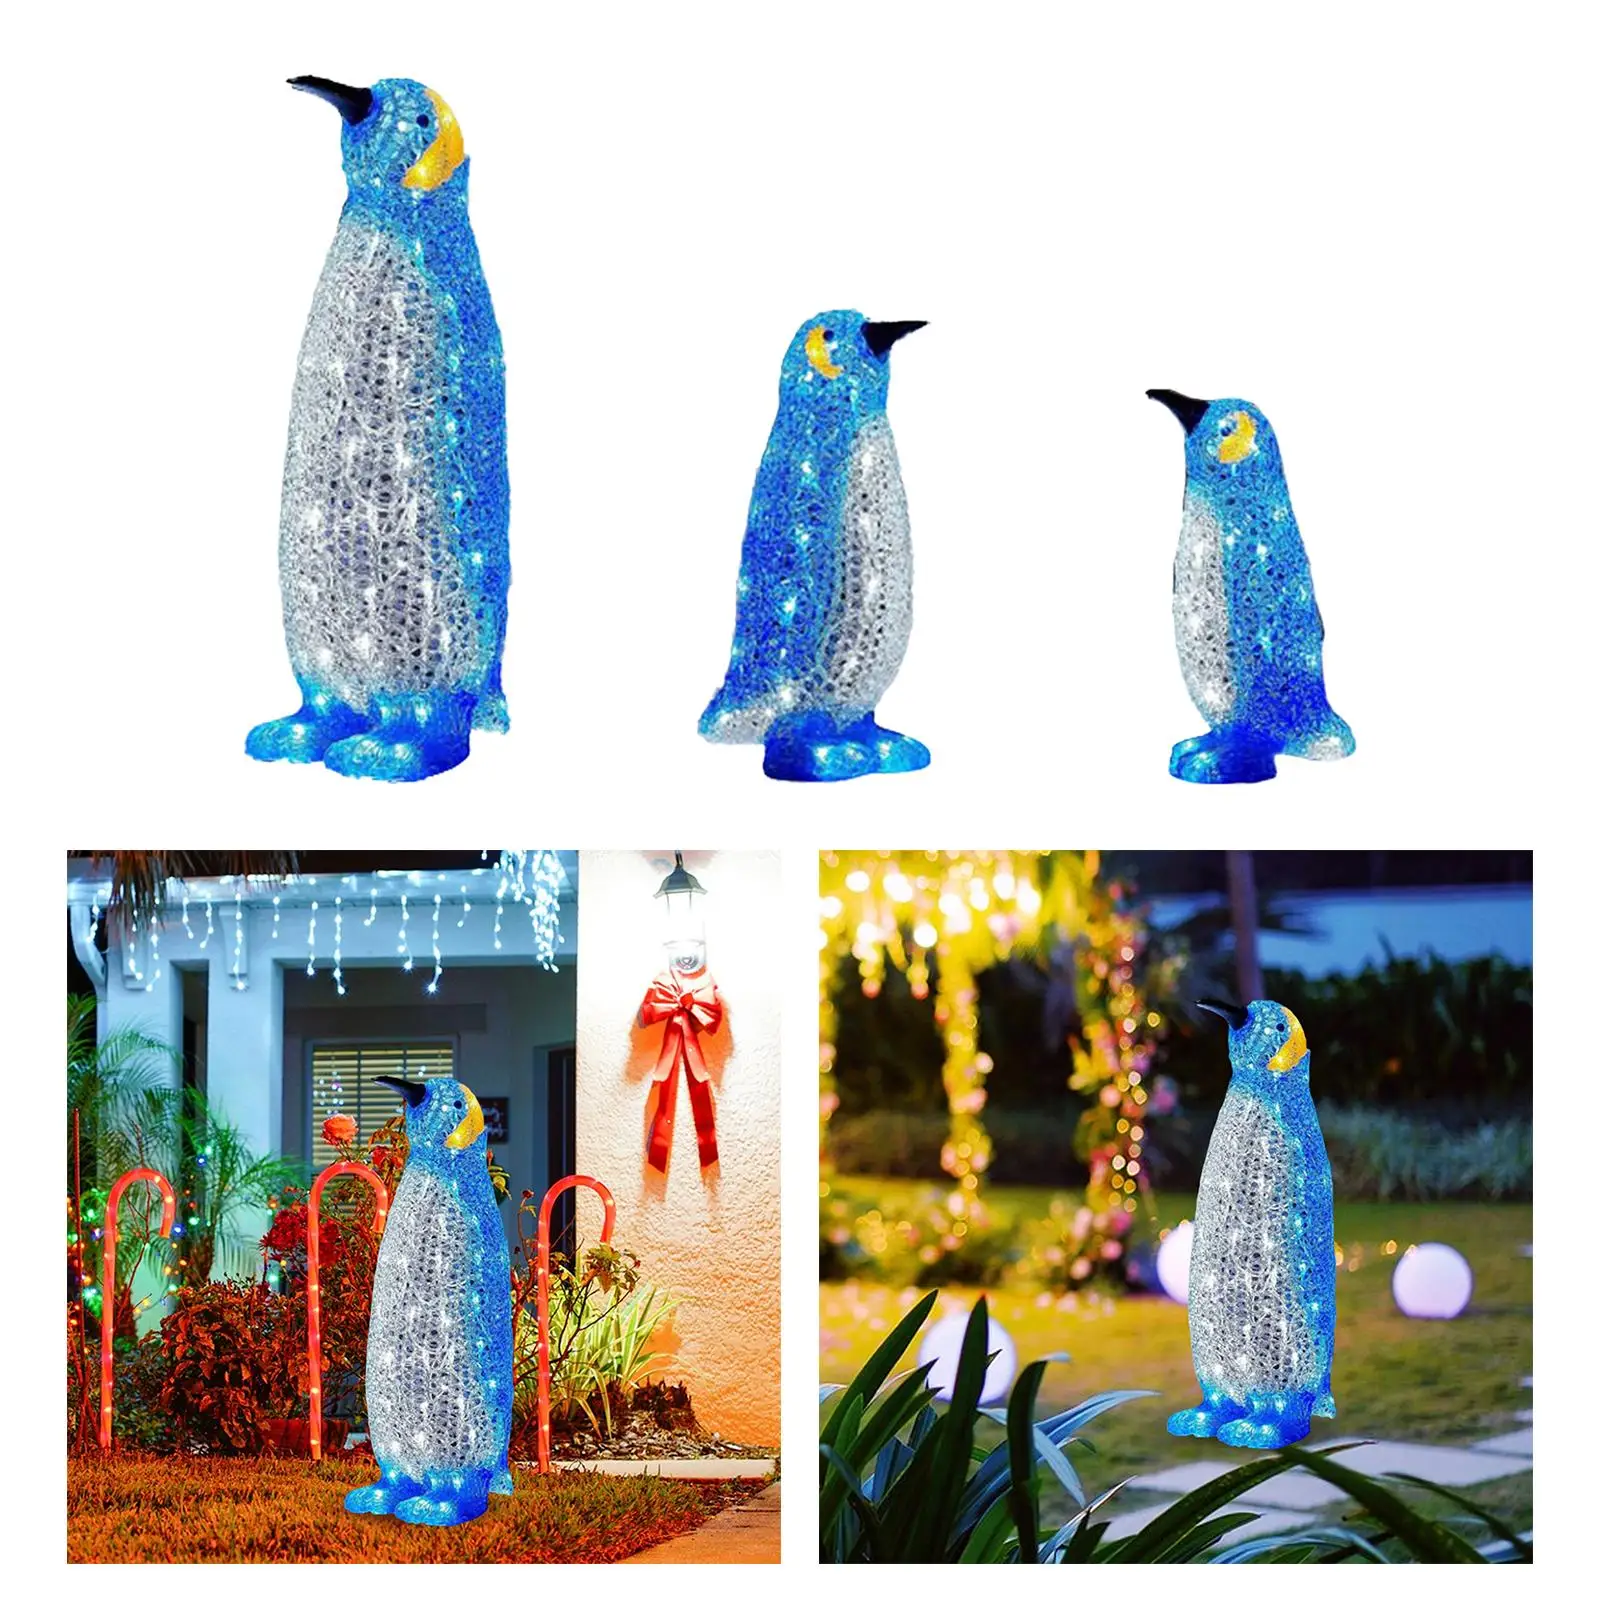 Acrylic Light Up Penguin Novelty Statue LED Penguin Lighting Figurine for Lawn Outdoor Indoor Decor Ornament